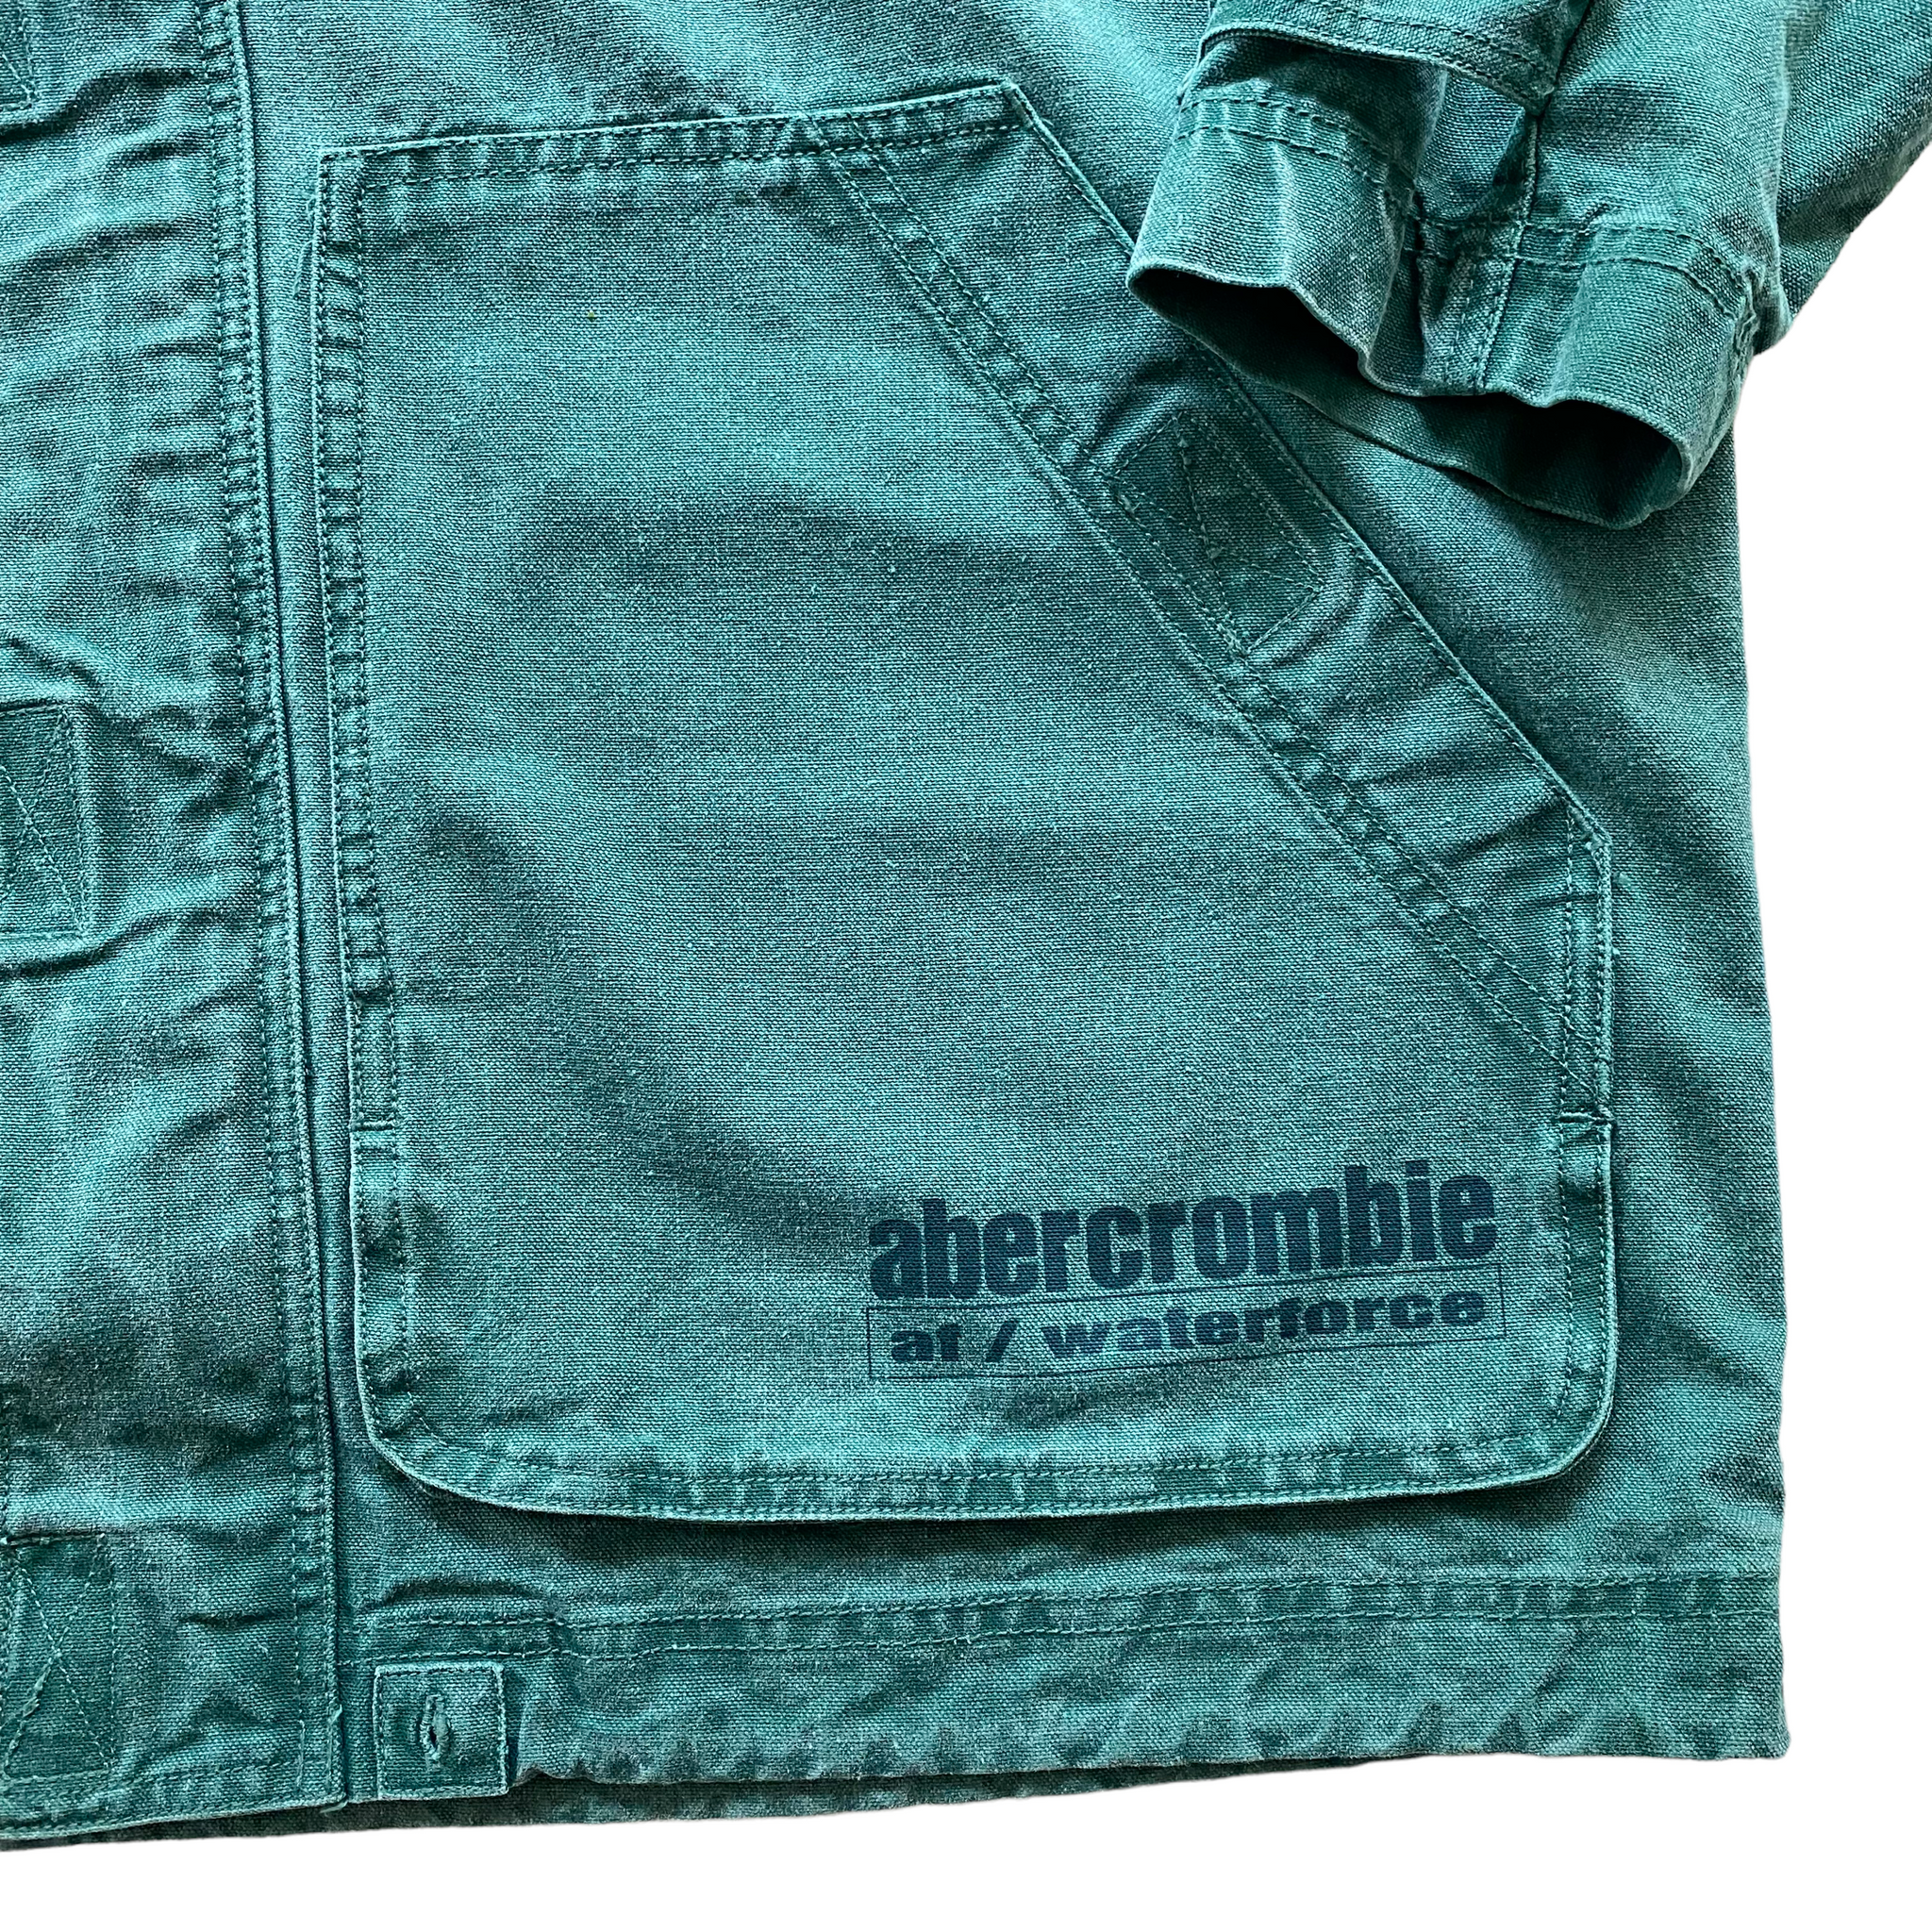 1995 Abercrombie and fitch water force Large fit